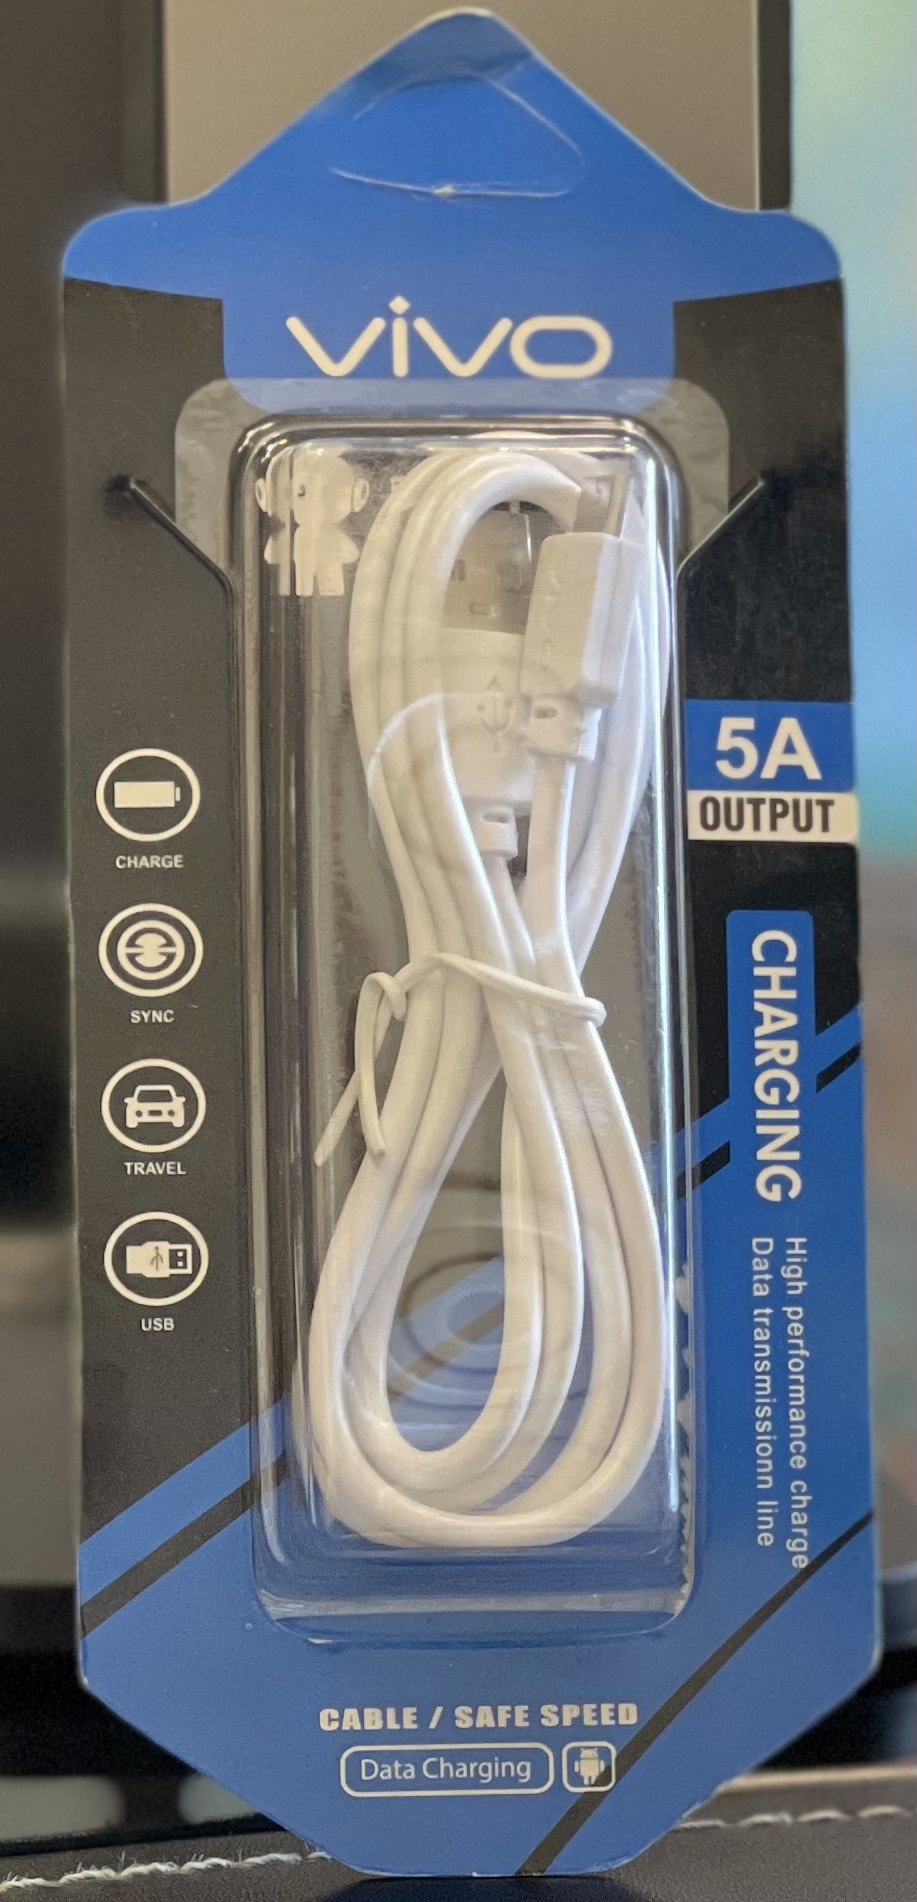 Vivo D28 charging cable